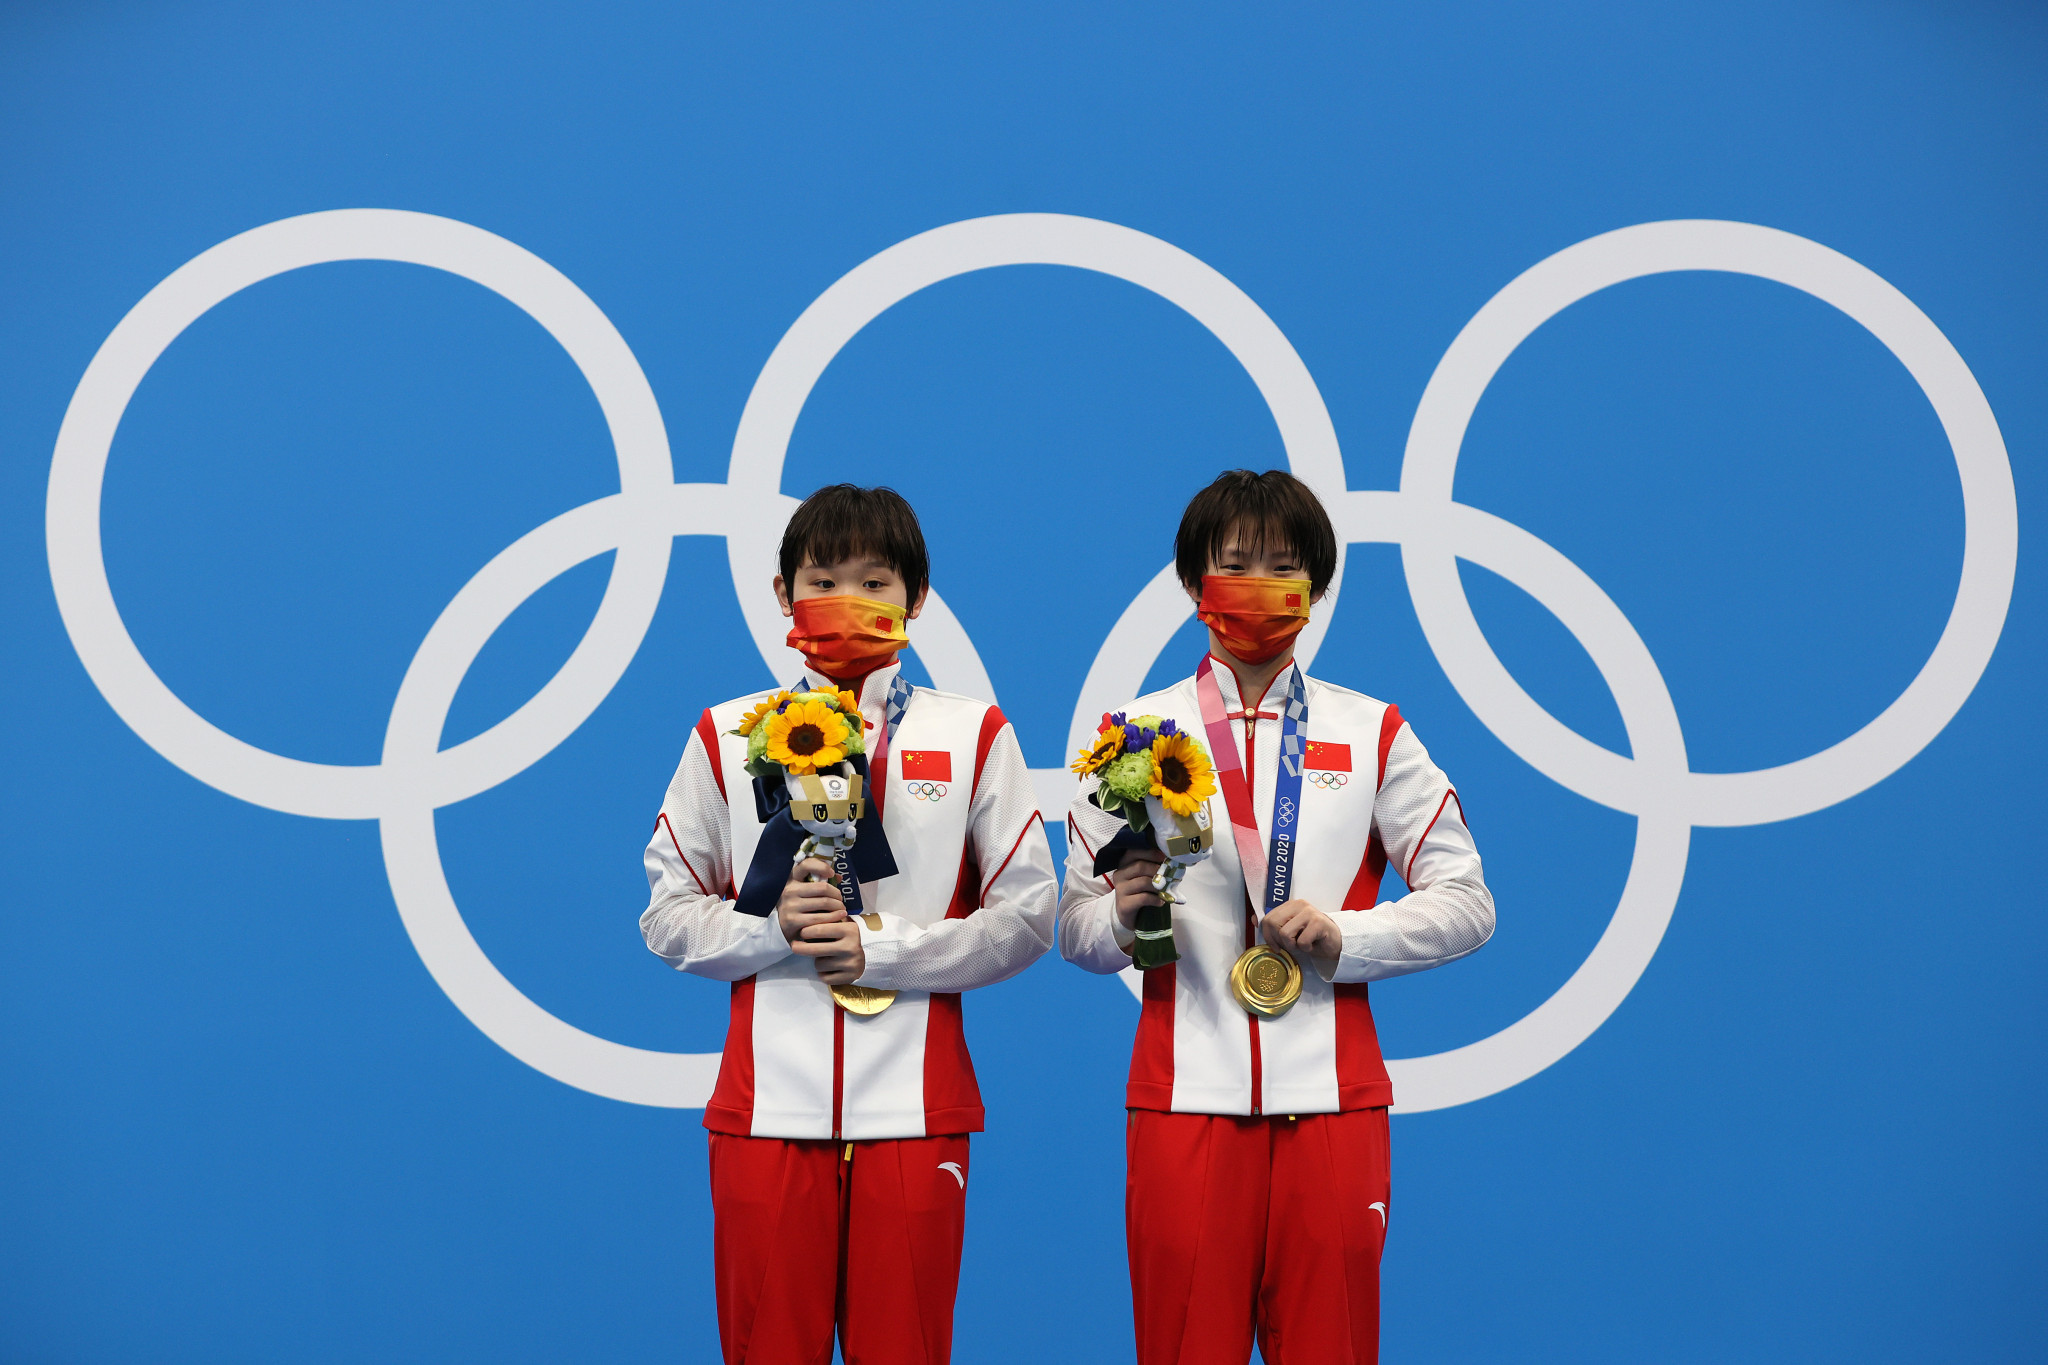 Chen Yuxi and Zhang Jiaqi earned a dominant victory in the women's 10m synchronised platform event ©Getty Images